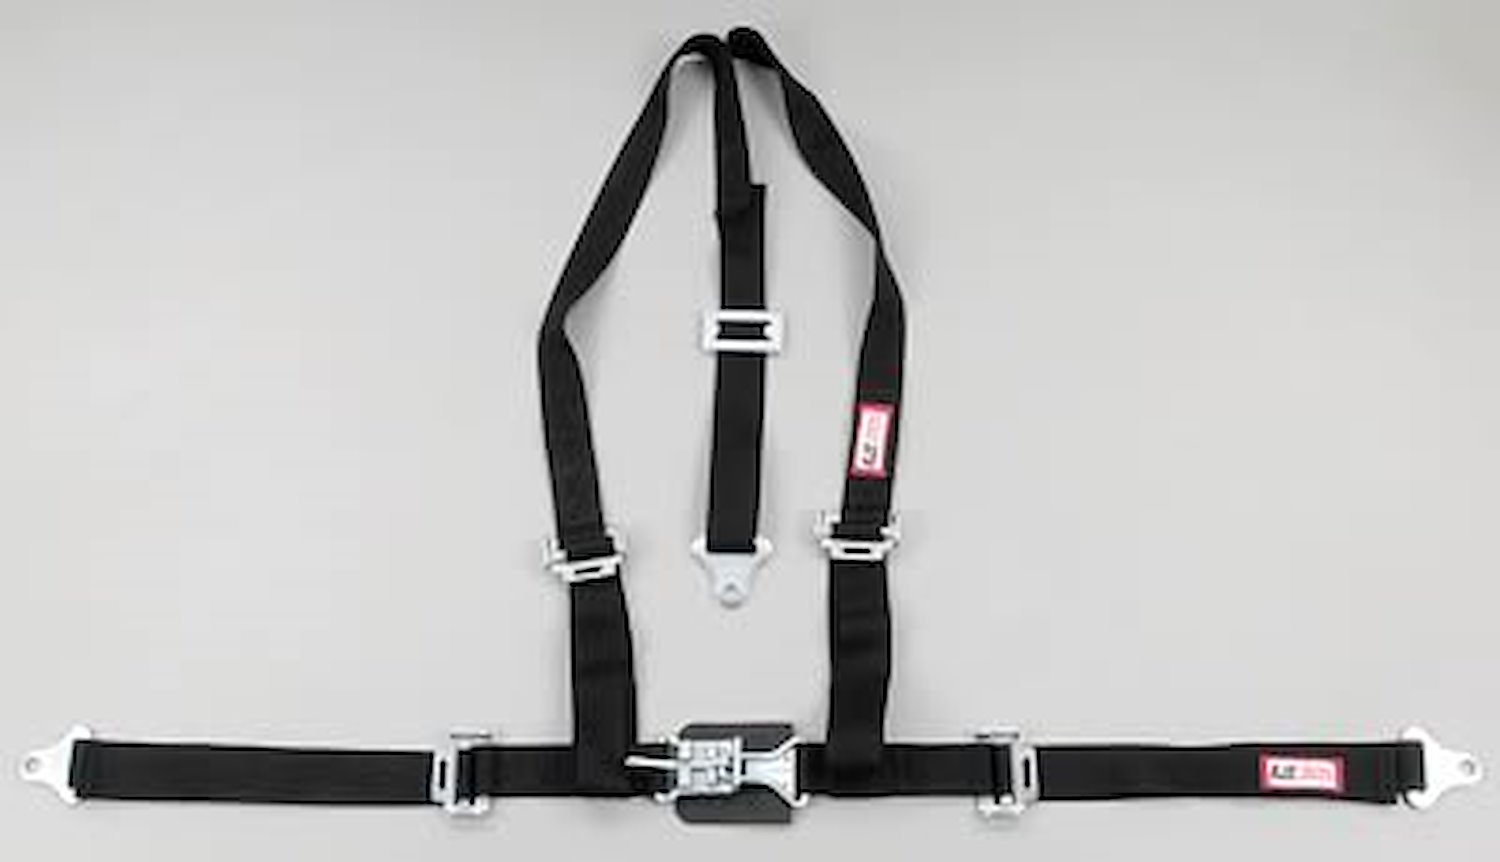 NON-SFI L&L HARNESS 2 PULL UP Lap Belt SEWN IN 2 S.H. V ROLL BAR Mount ALL SNAP ENDS PURPLE